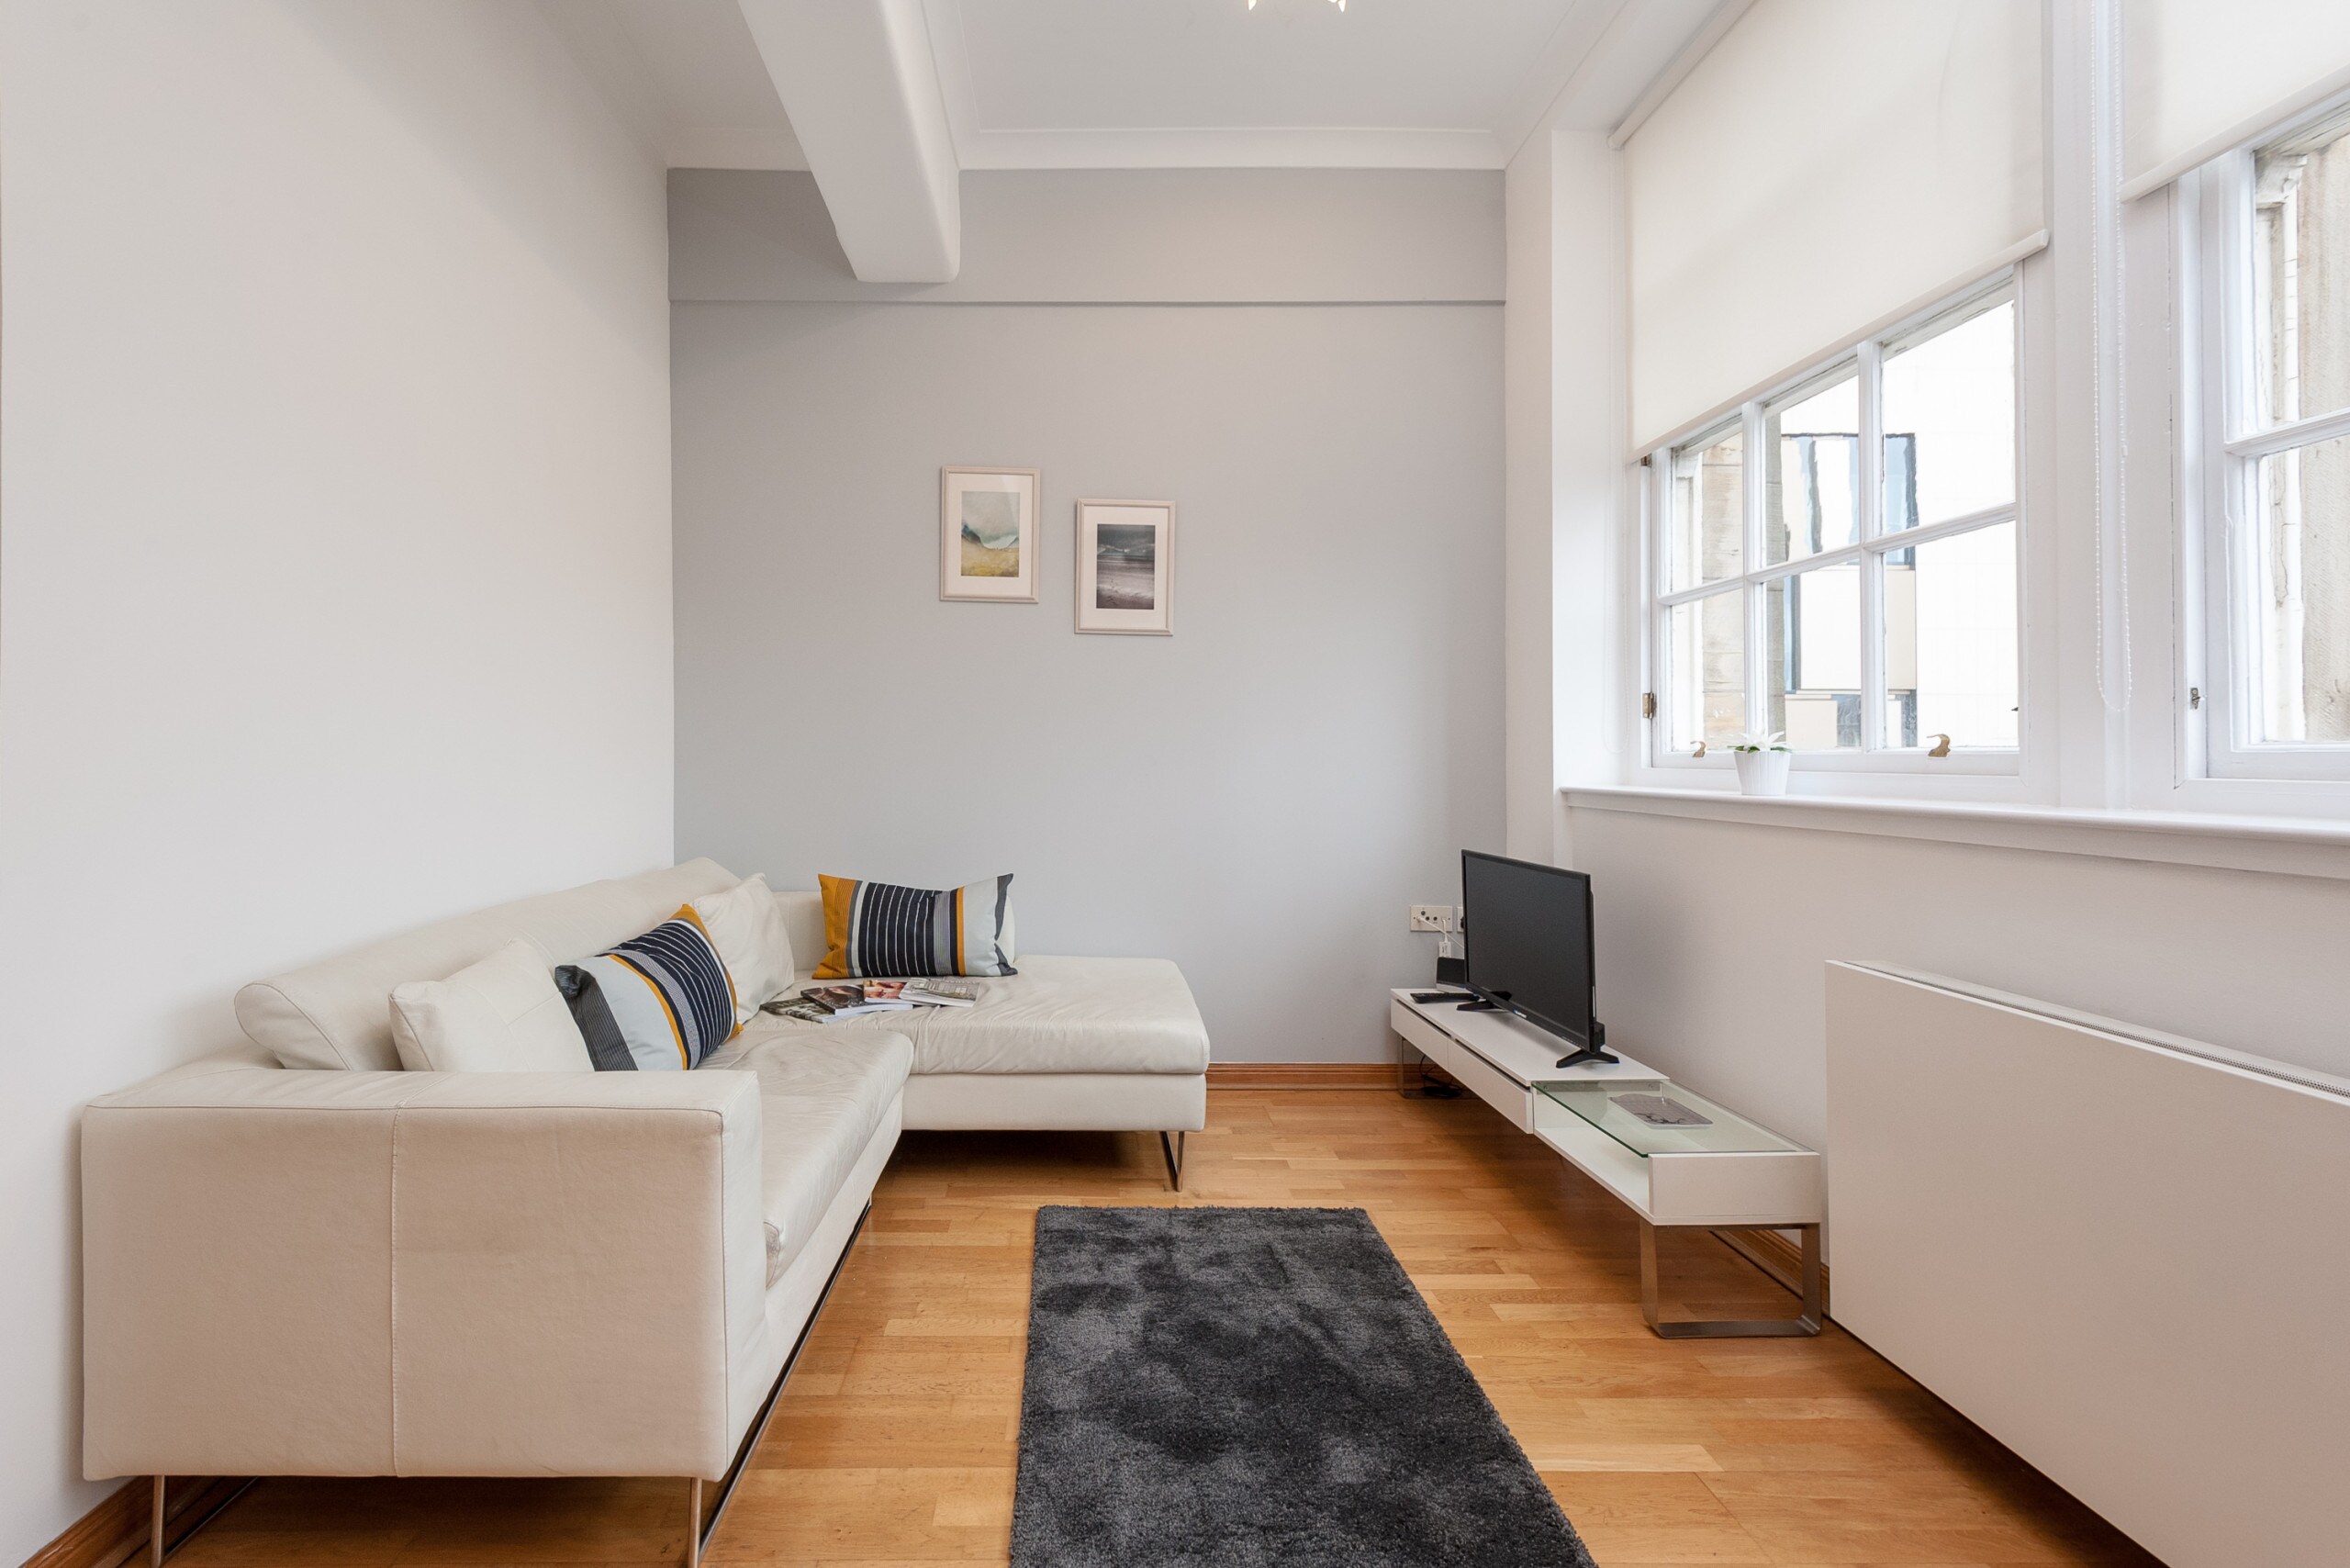 Property Image 2 - Cute stylish apartment located in the Merchant City